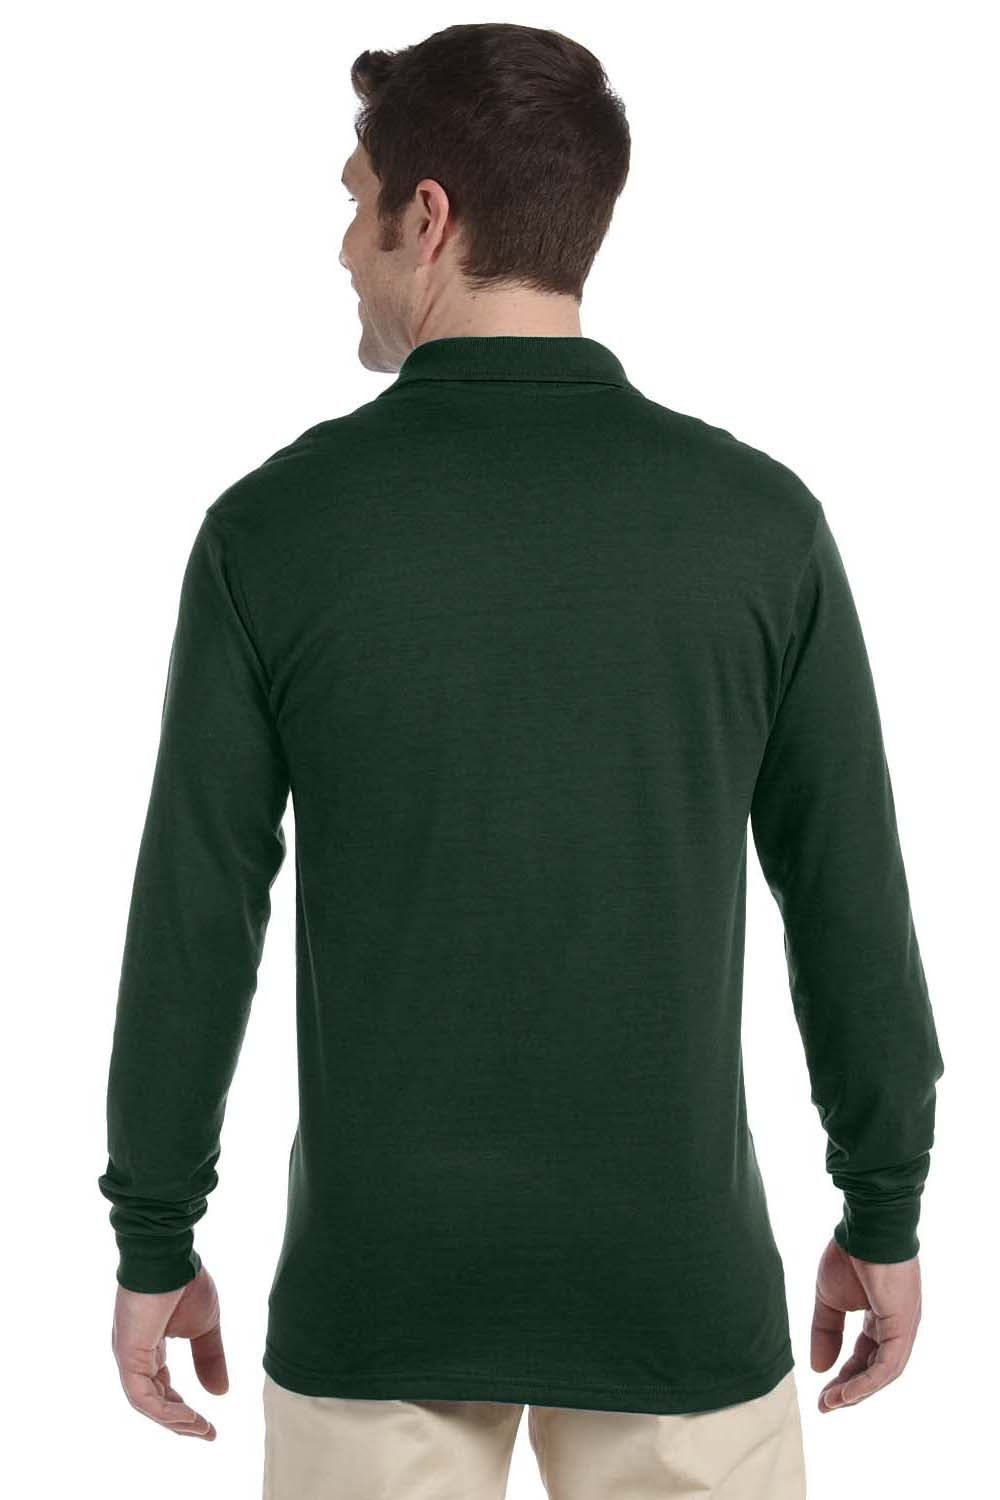 Jerzees 437ML Mens SpotShield Stain Resistant Long Sleeve Polo Shirt Forest Green Back